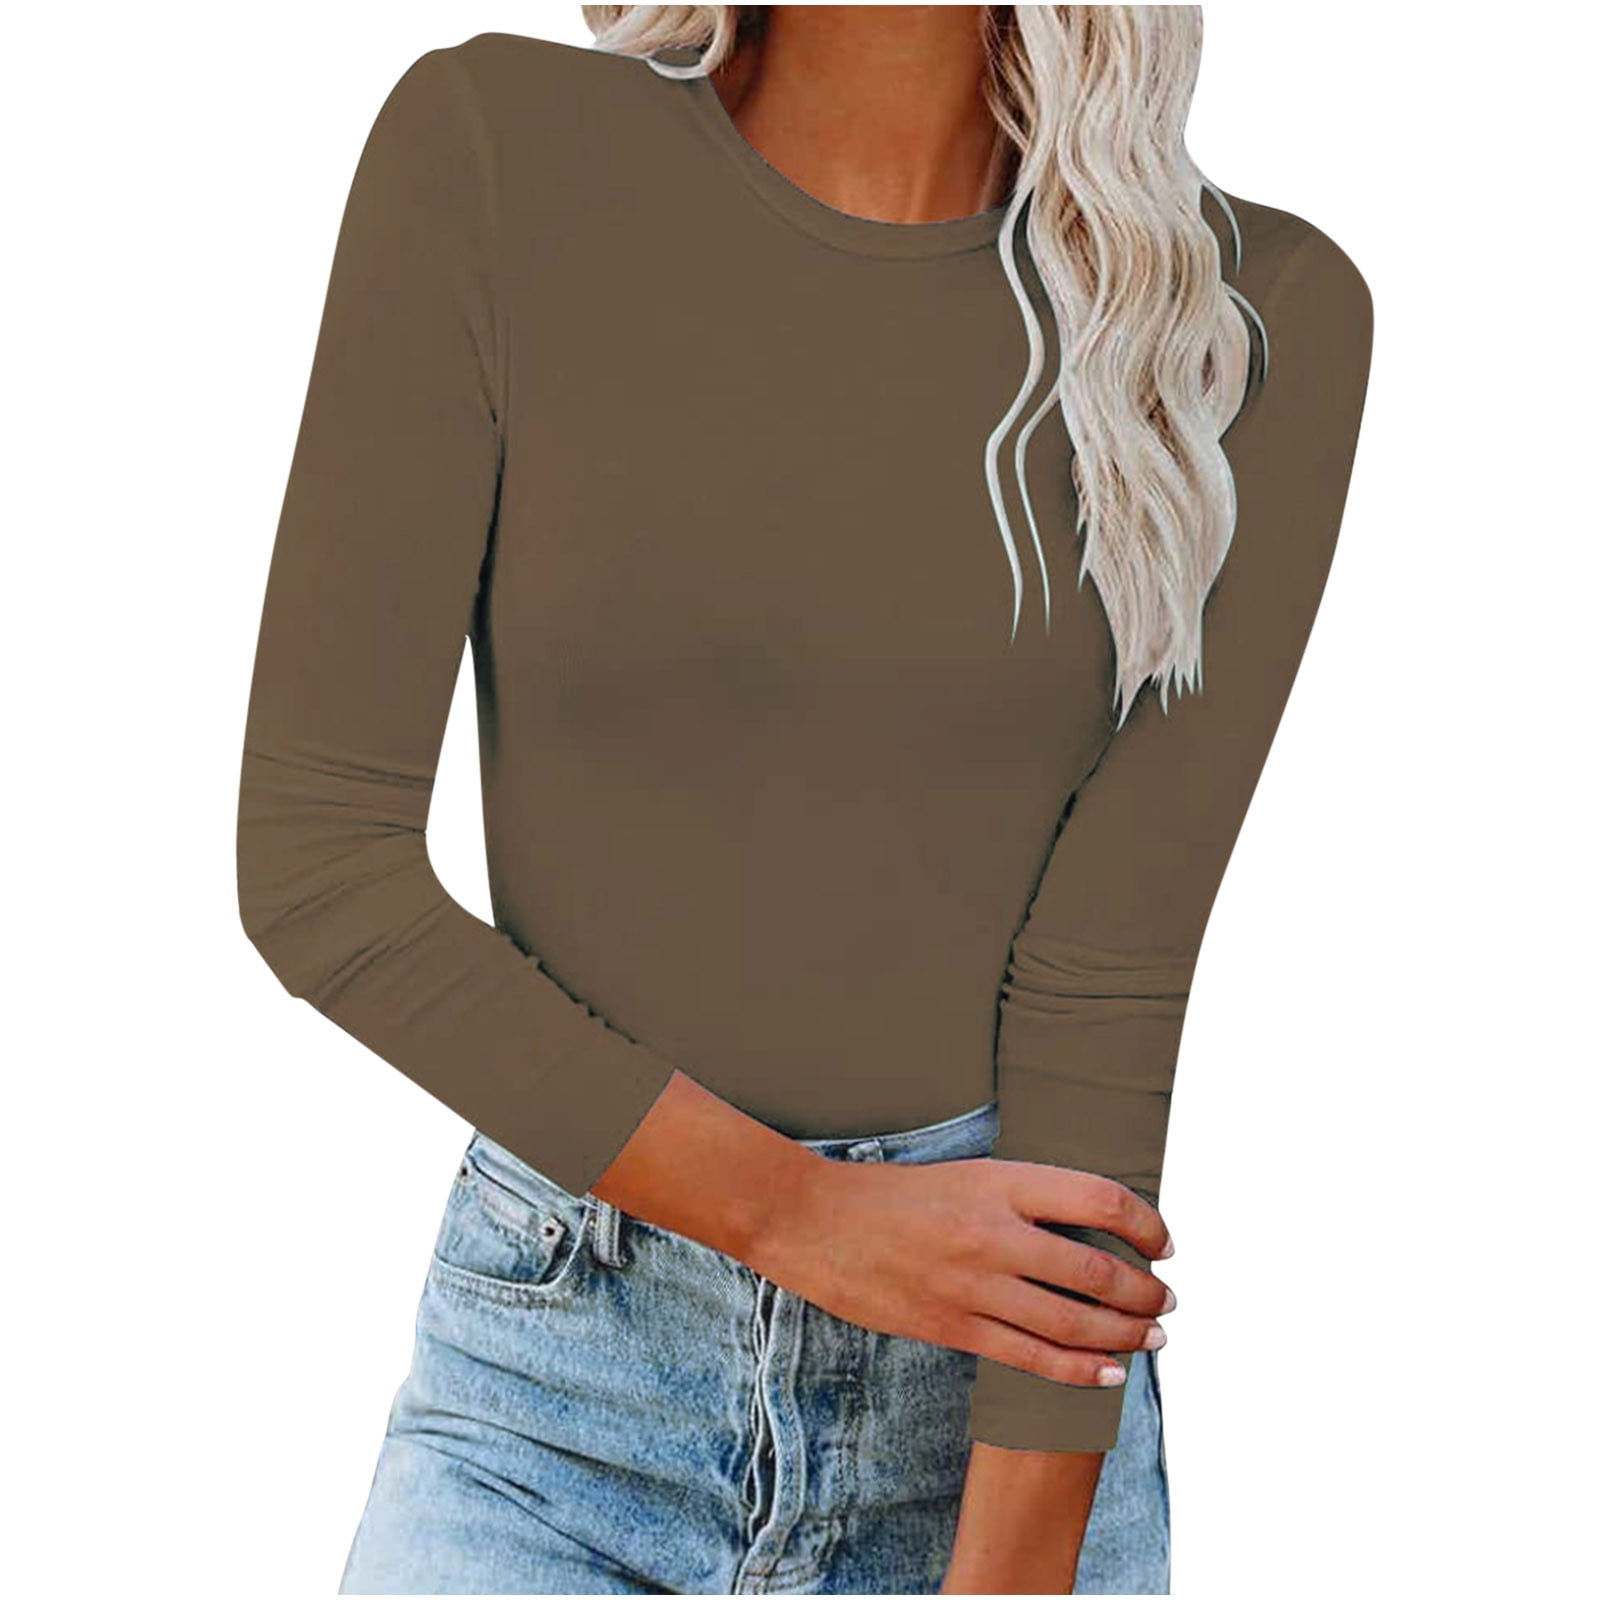 tklpehg Long Sleeve Going Out Tops for Women Long Sleeve Tops